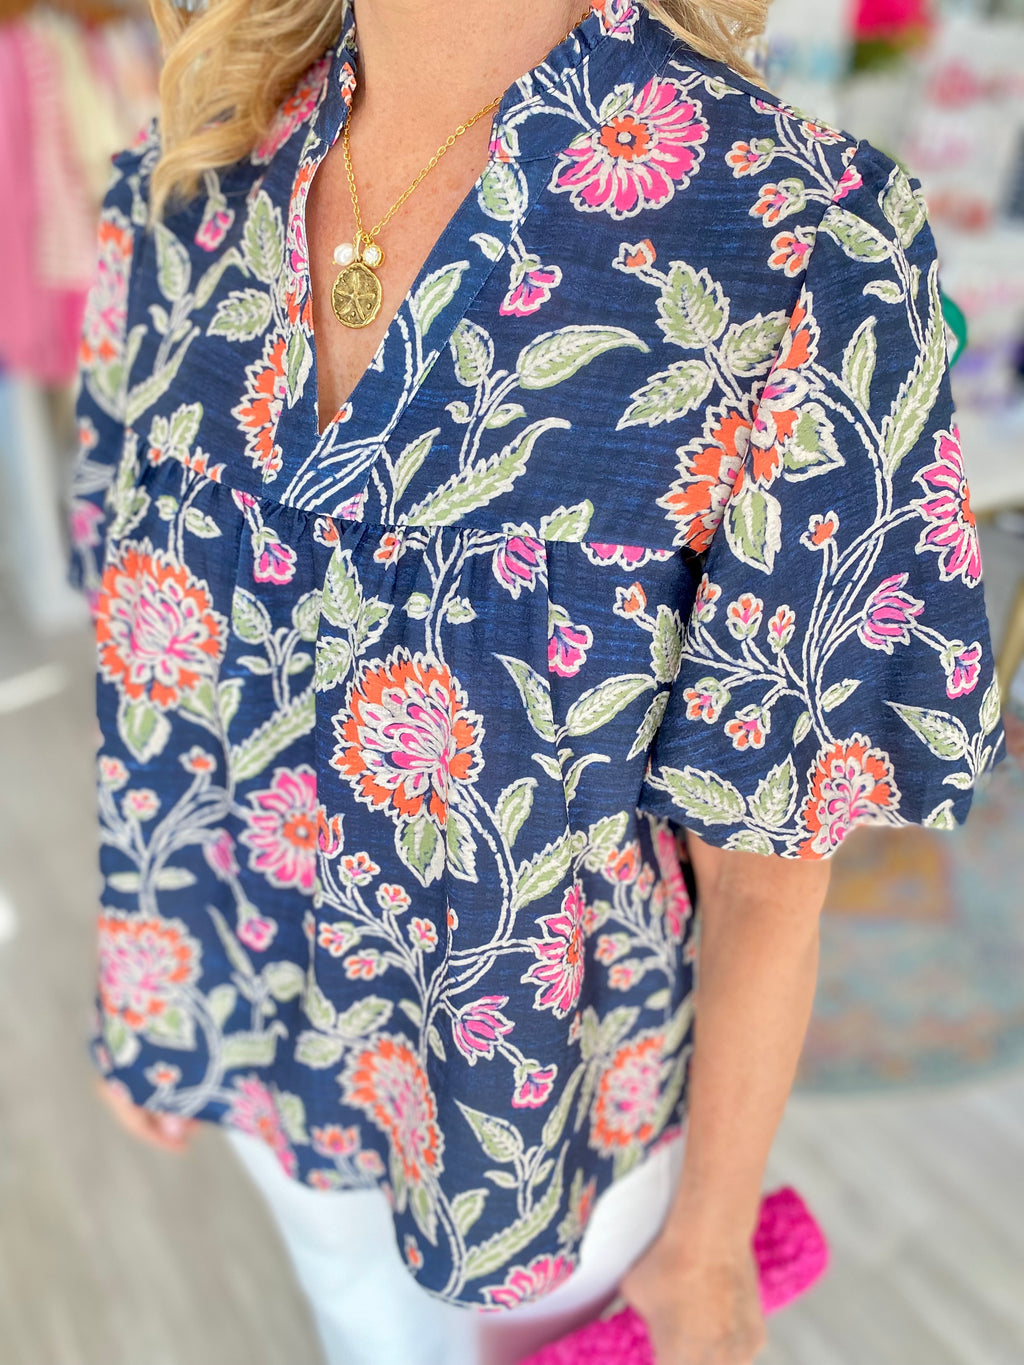 Floral Print Puff Sleeve Top